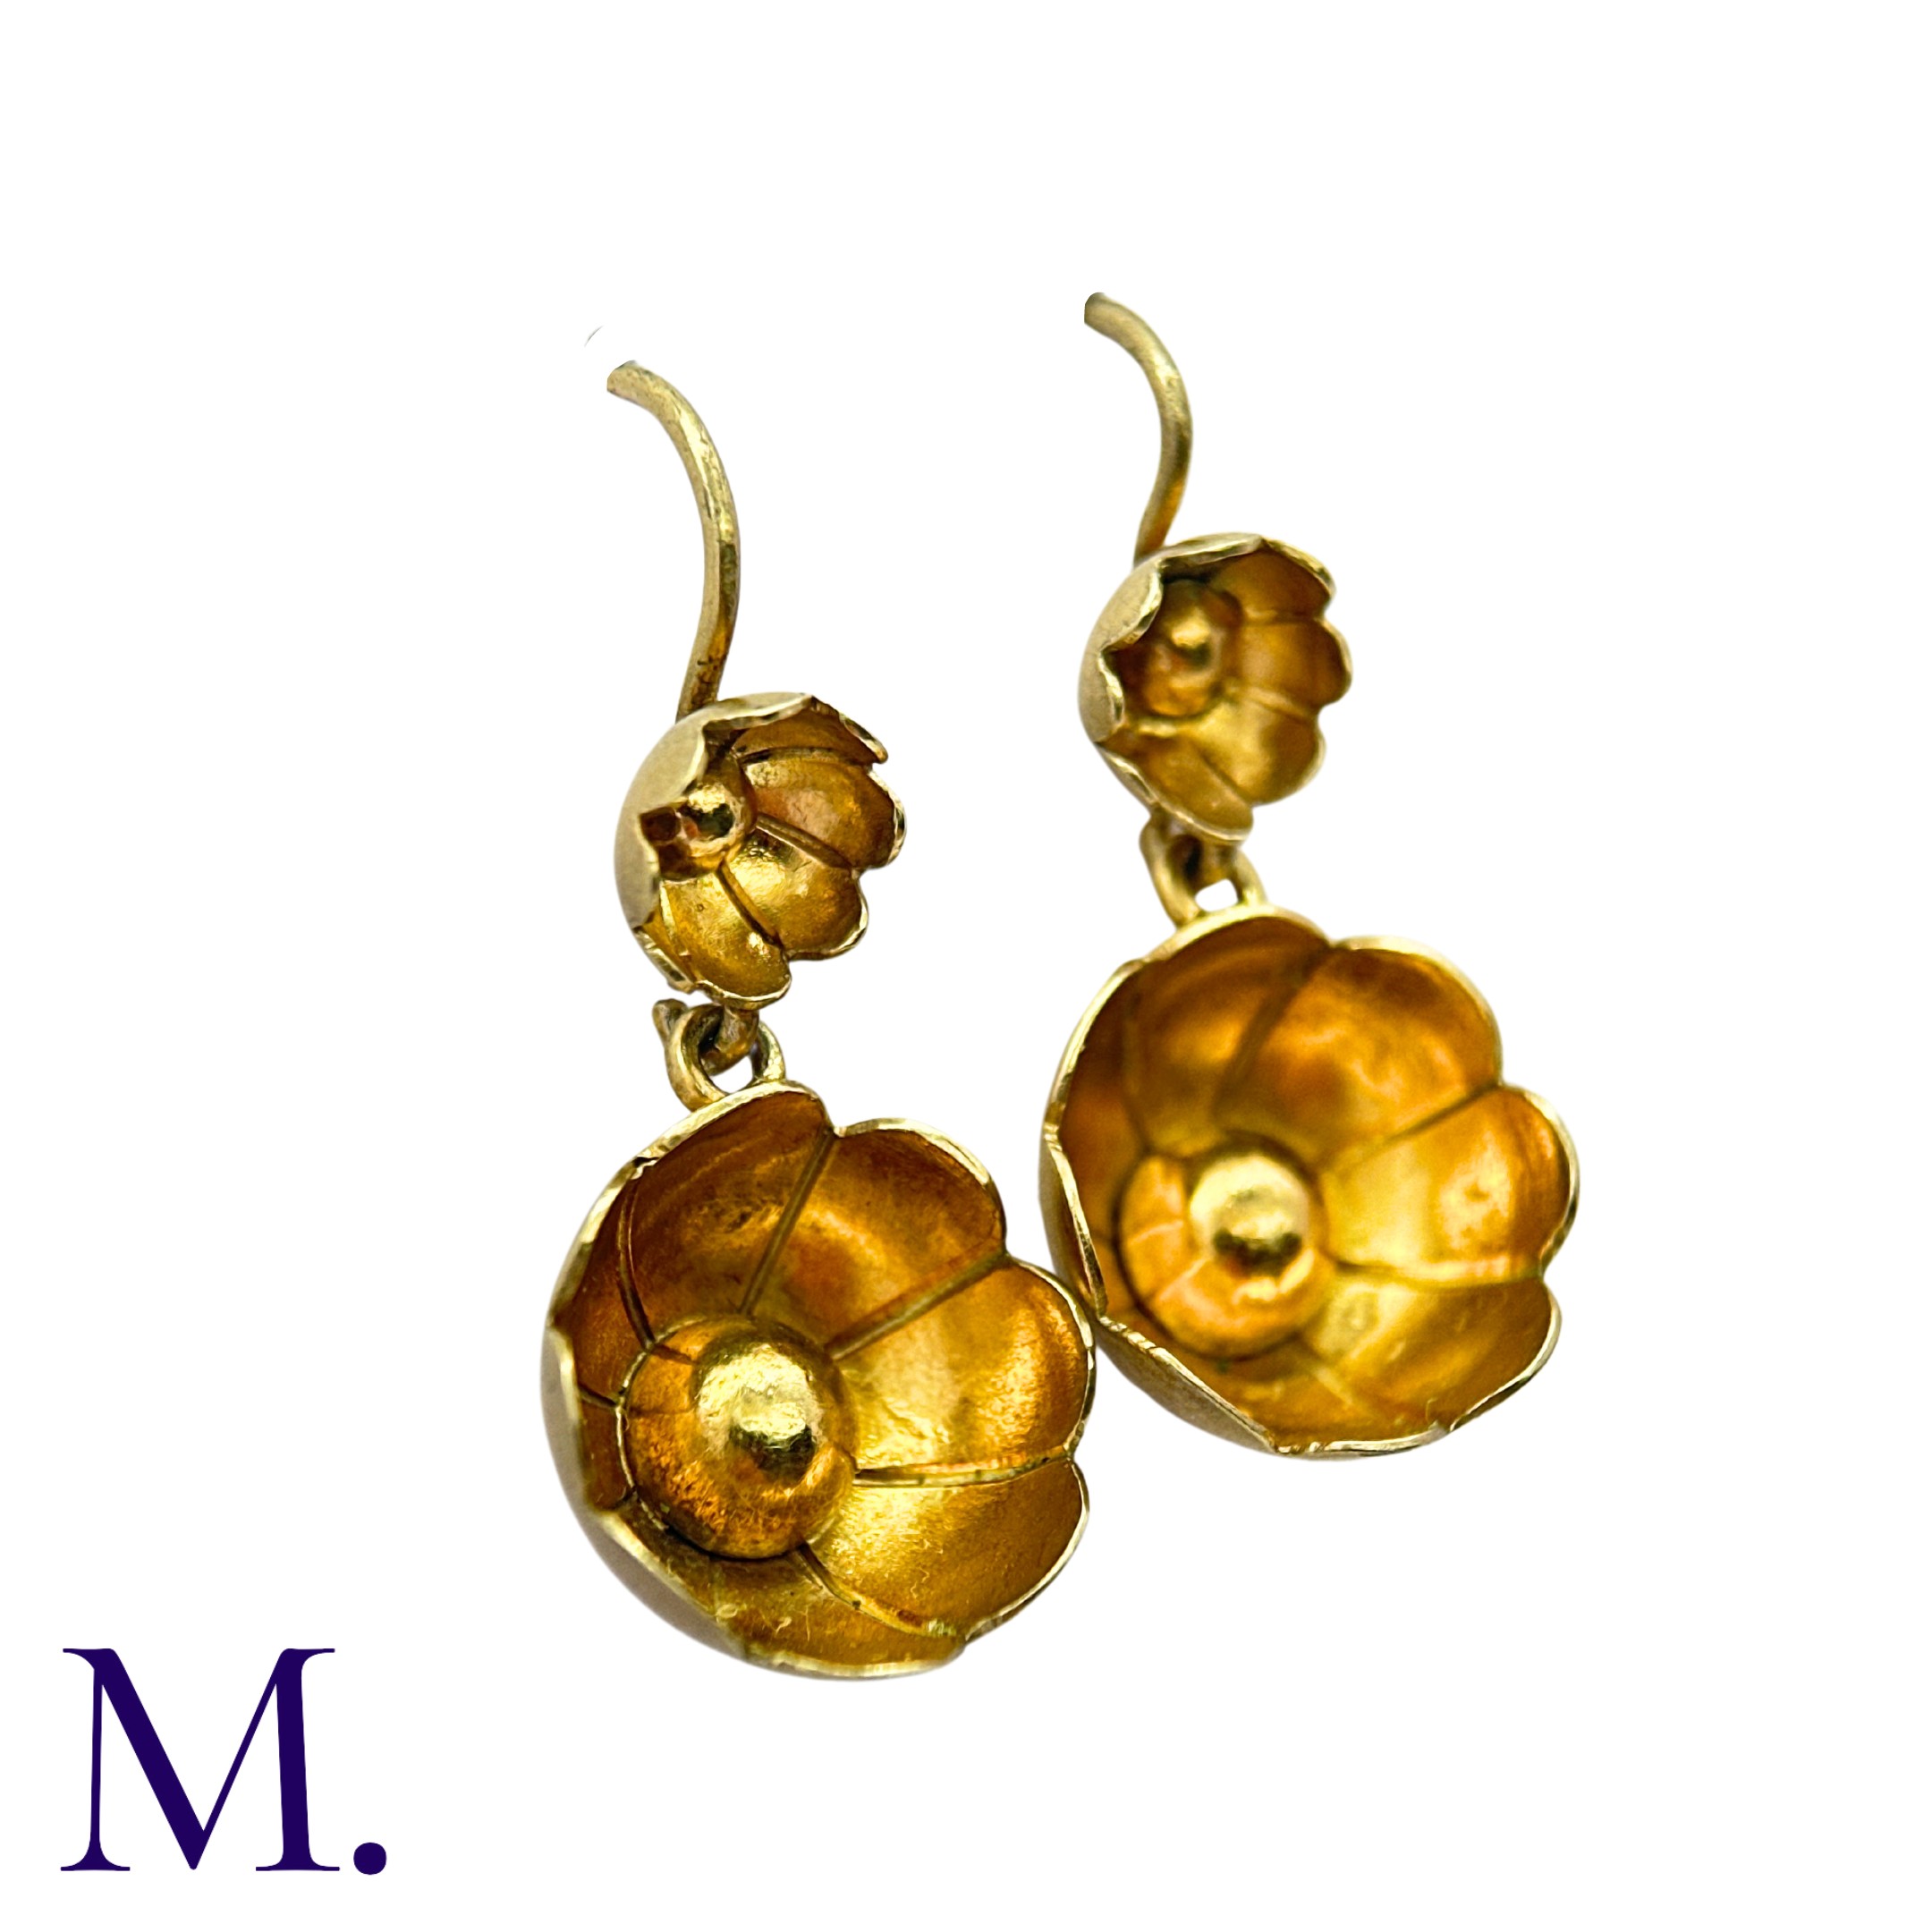 A Pair of Silver Gilt Earrings in floral form. Size: 2.9cm Weight: 2.8g - Image 2 of 3